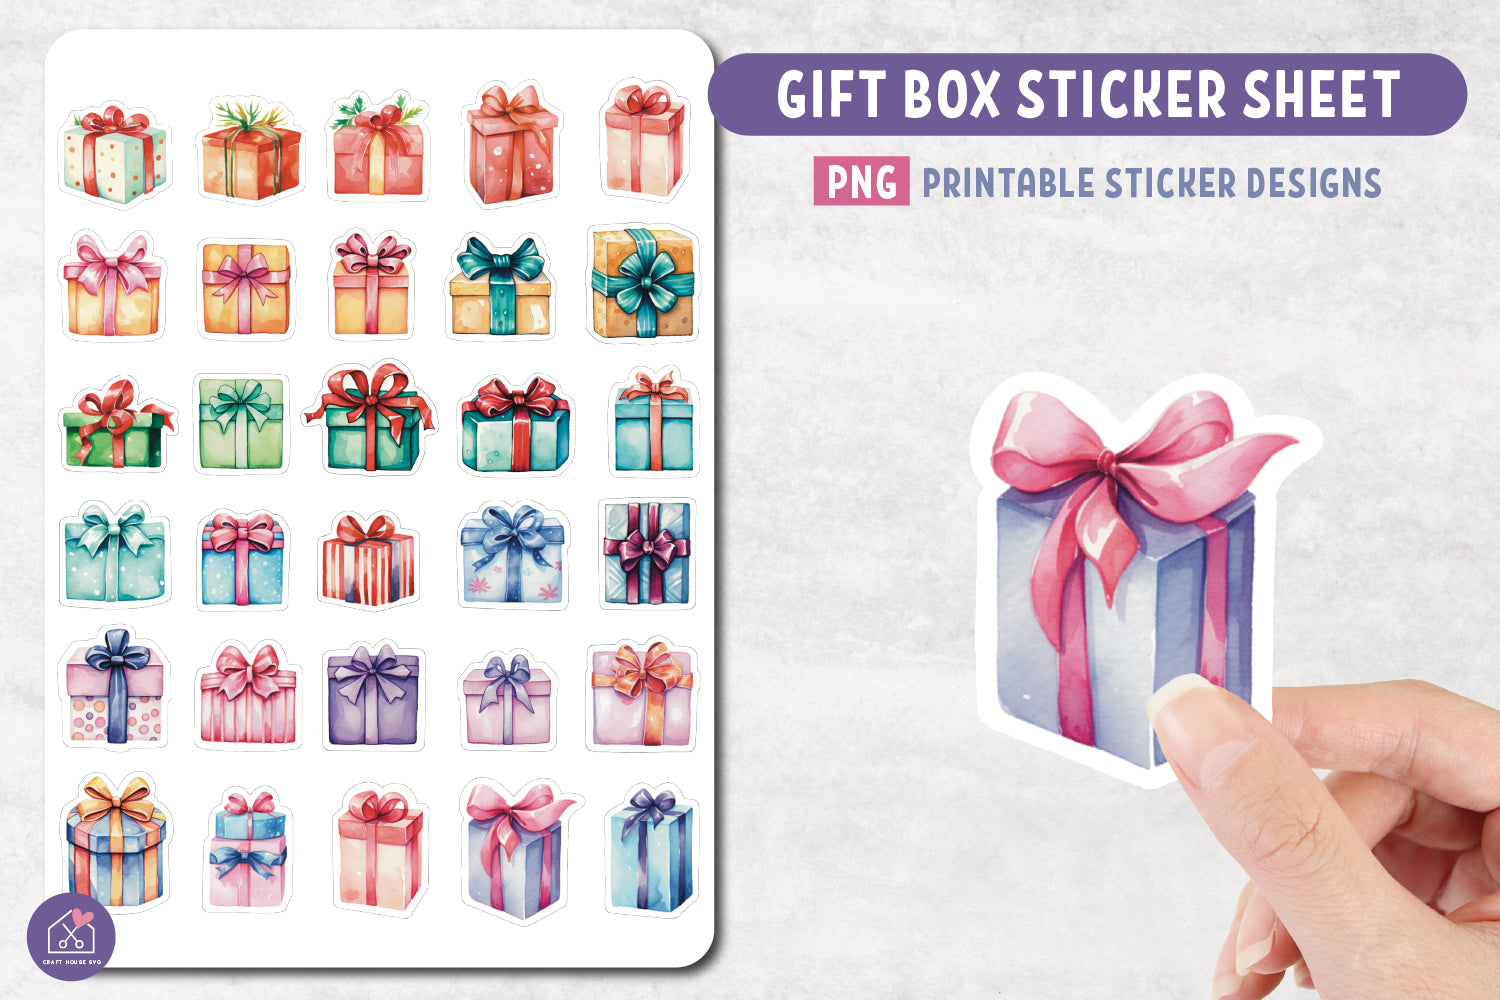 Gift Box Stickers PNG Print and Cut Birthday Sticker Designs